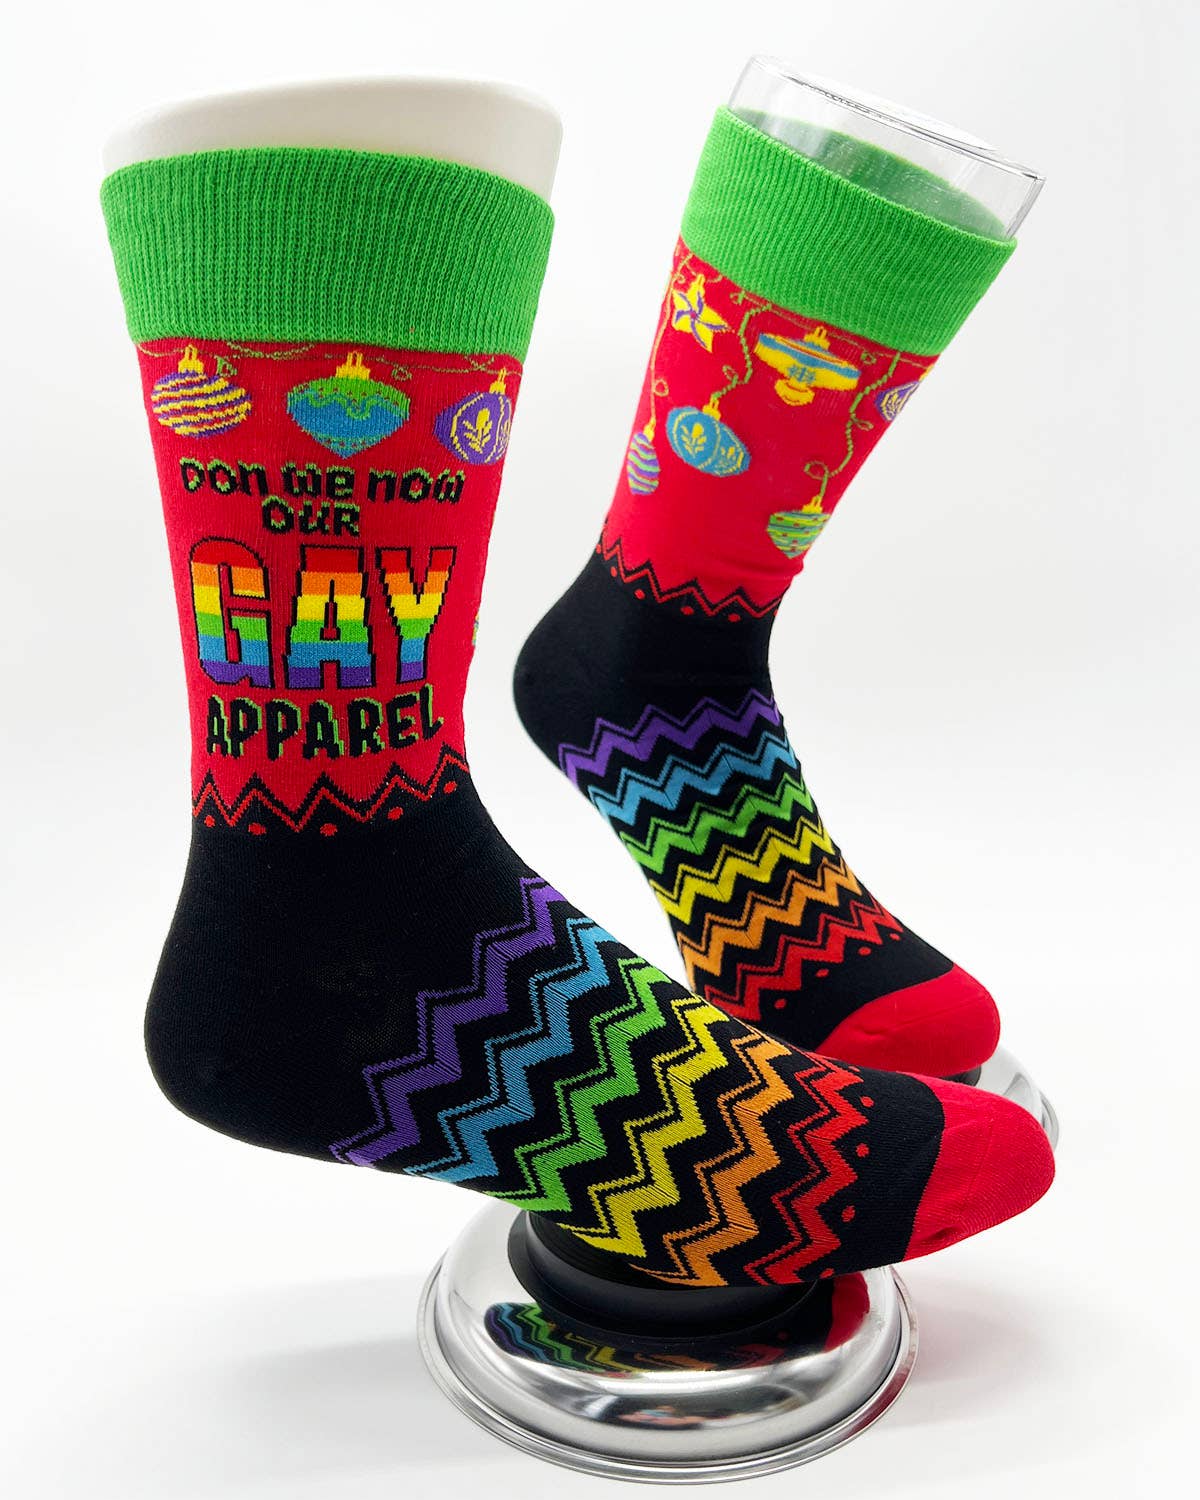 Don We Now Our Gay Apparel Men's Novelty Crew Socks